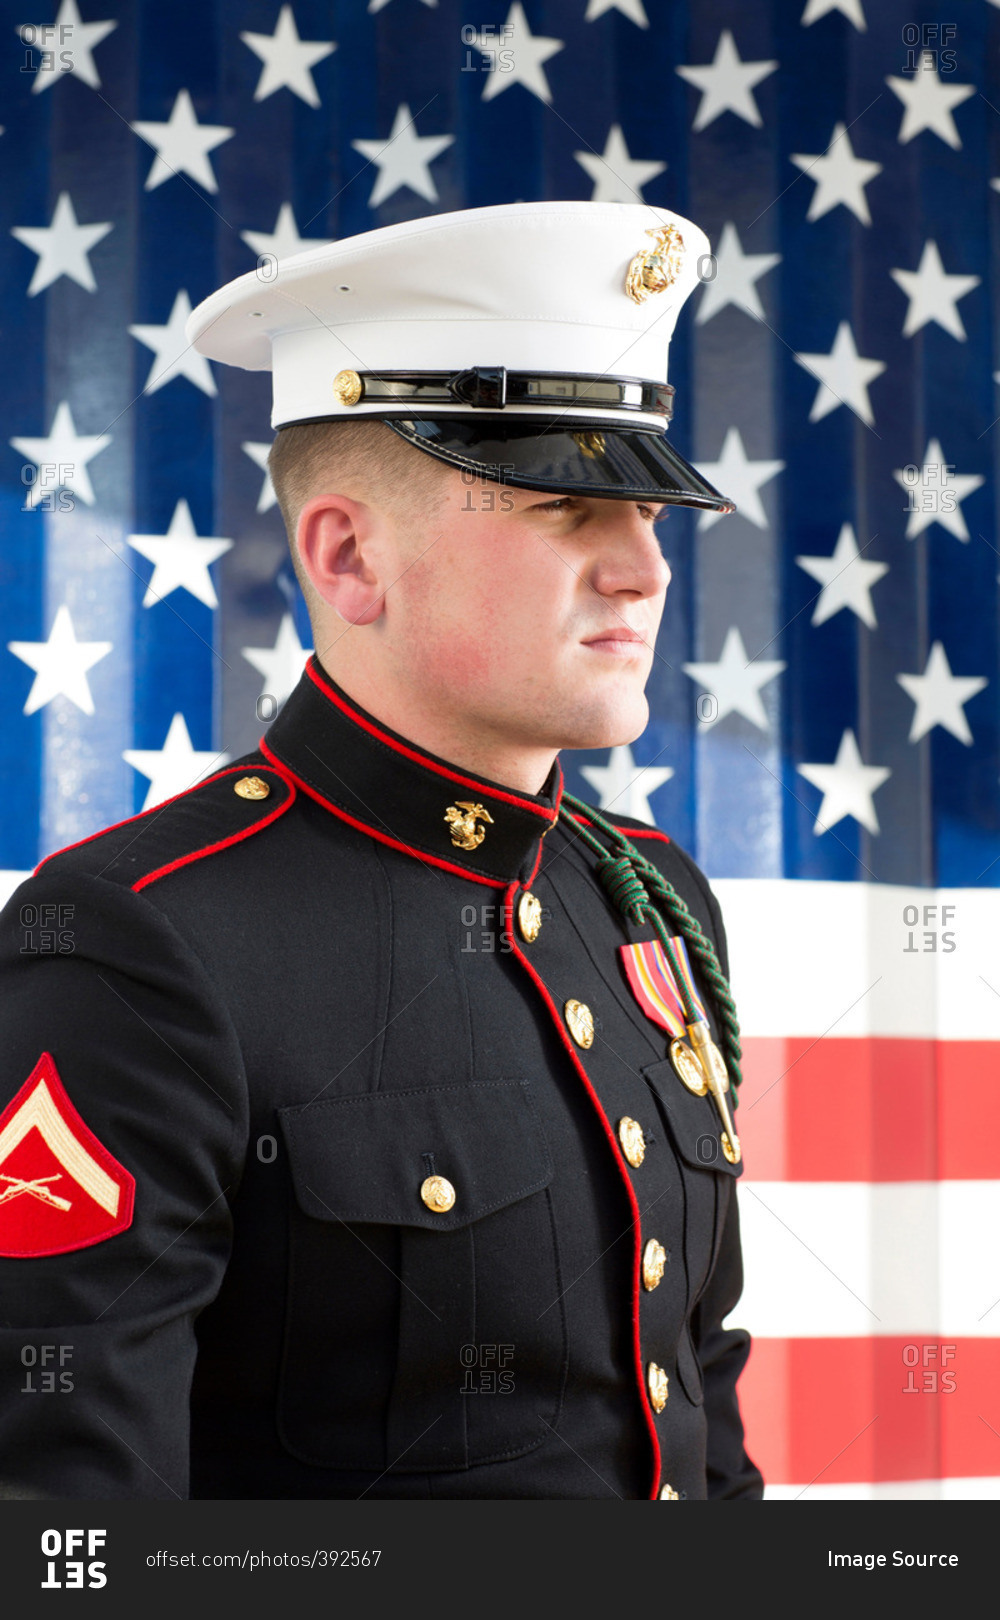 Serviceman in dress blues by US flag